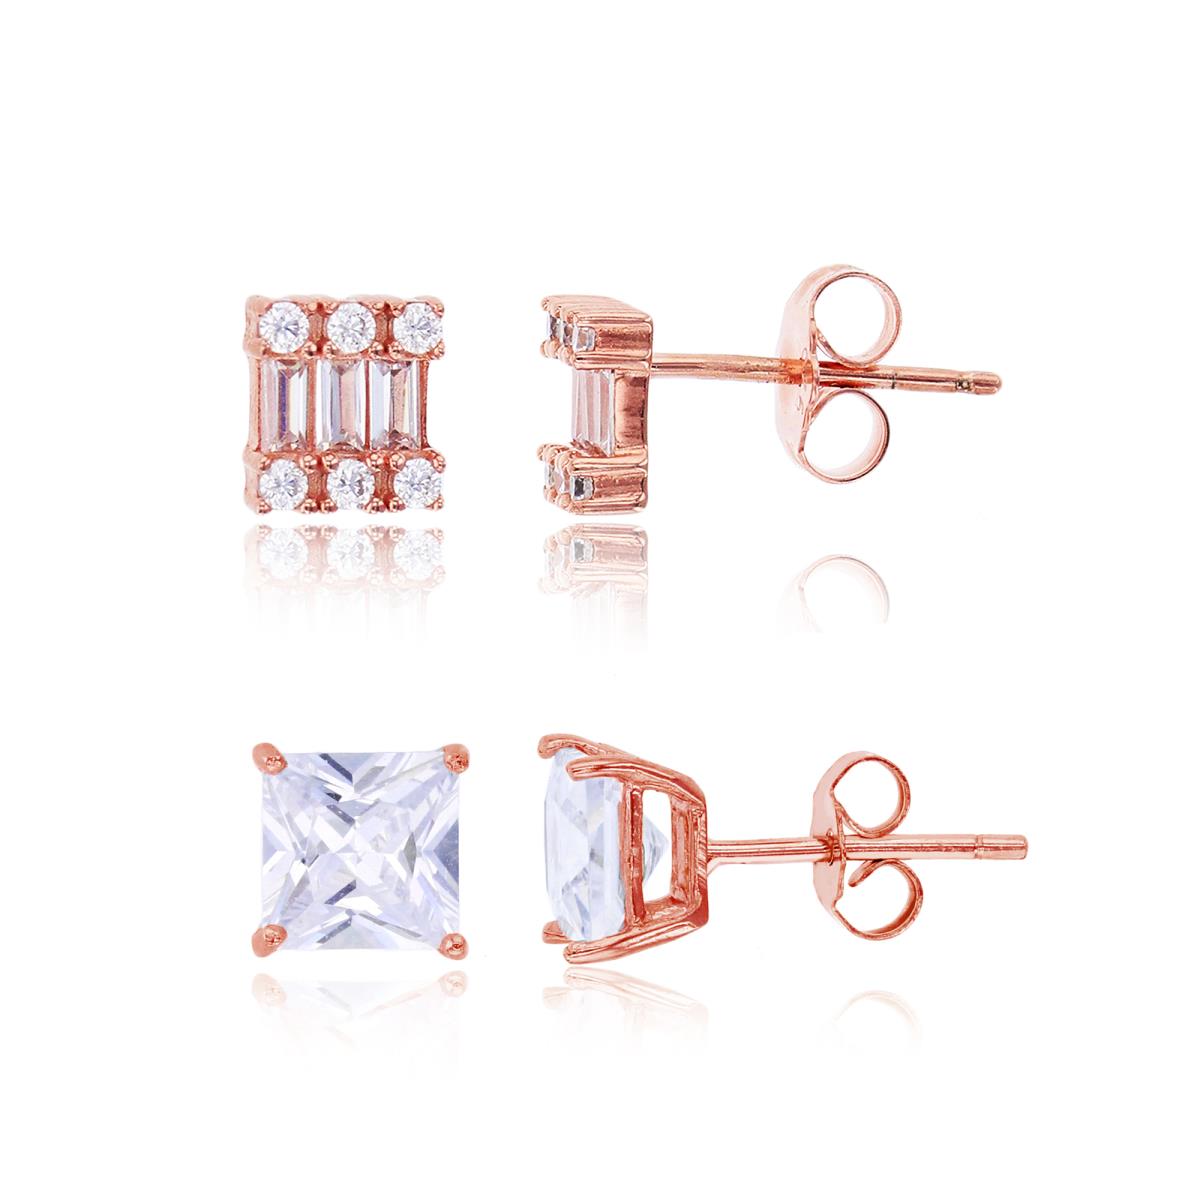 Sterling Silver Rose 6x6mm Rd/Baguette CZ Square & 6x6mm Sq Solitaire Stud Earring Set